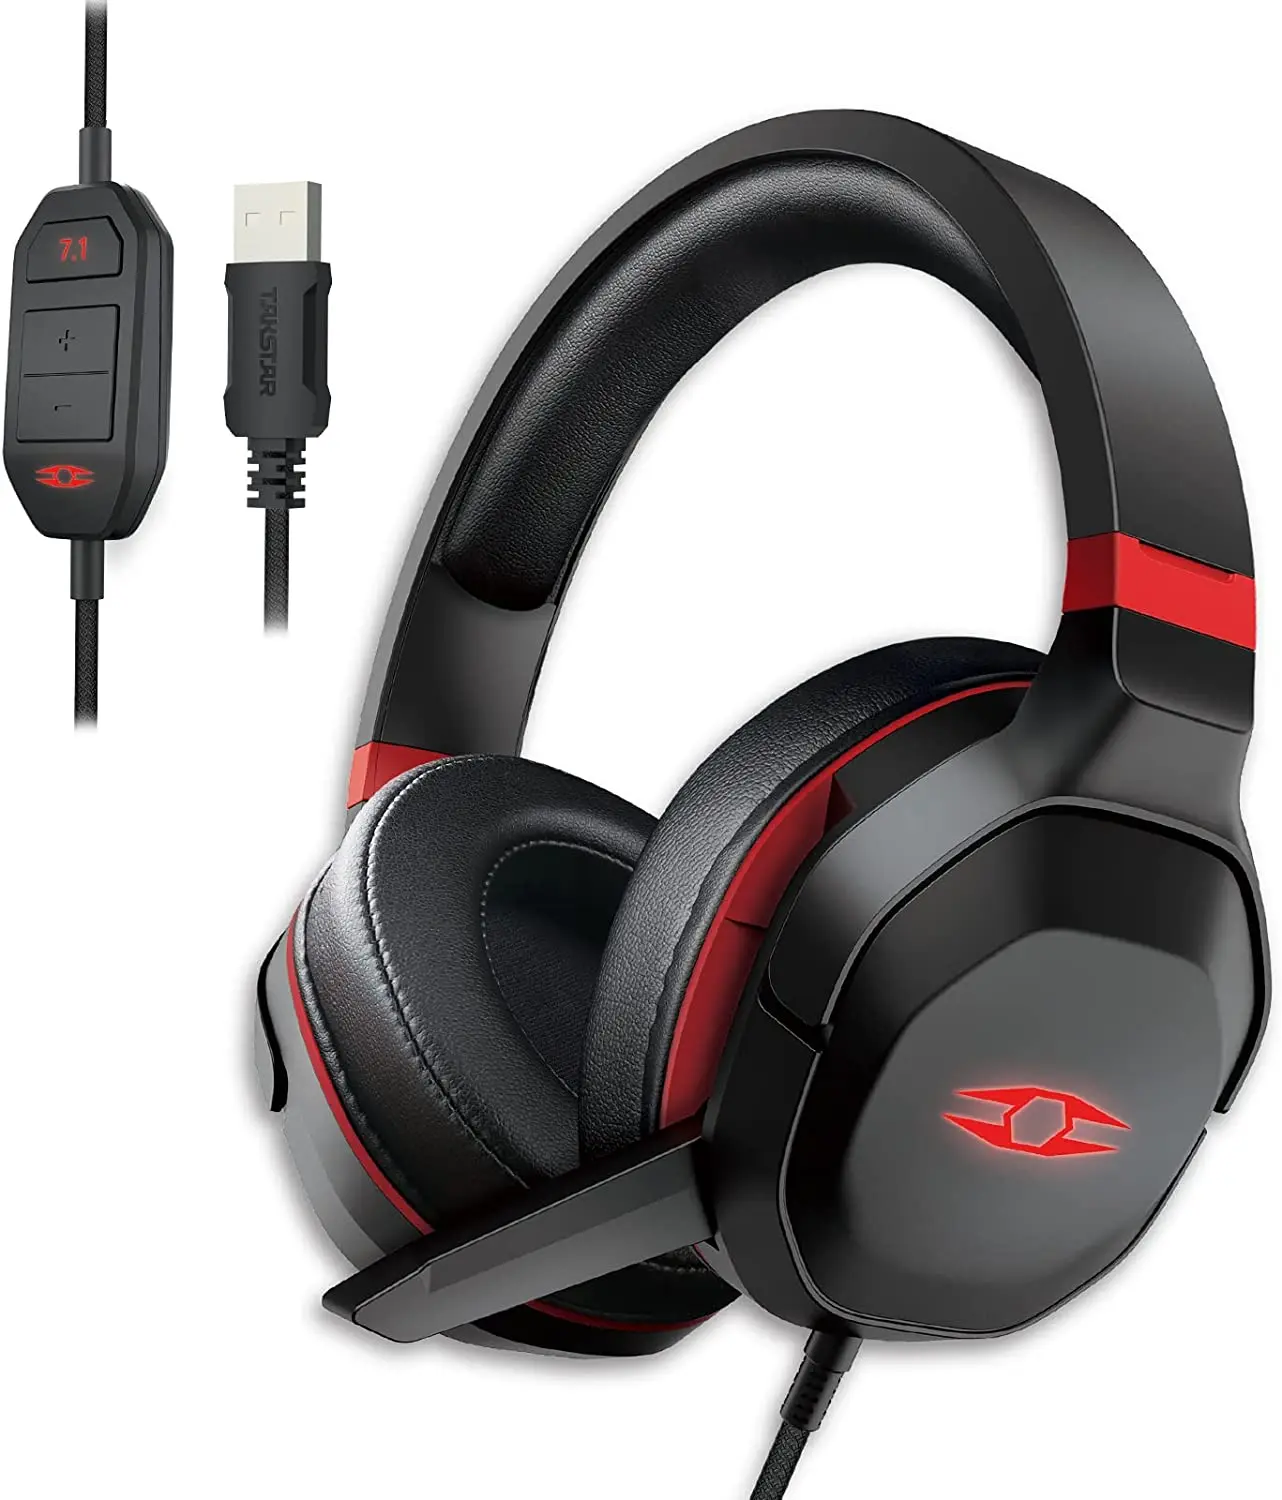 

USB Wired Gaming Headset with 7.1 Virtual Surround Liberty Gamer Over Ear Headphone with Adjustable Microphone LED Light PC MAC